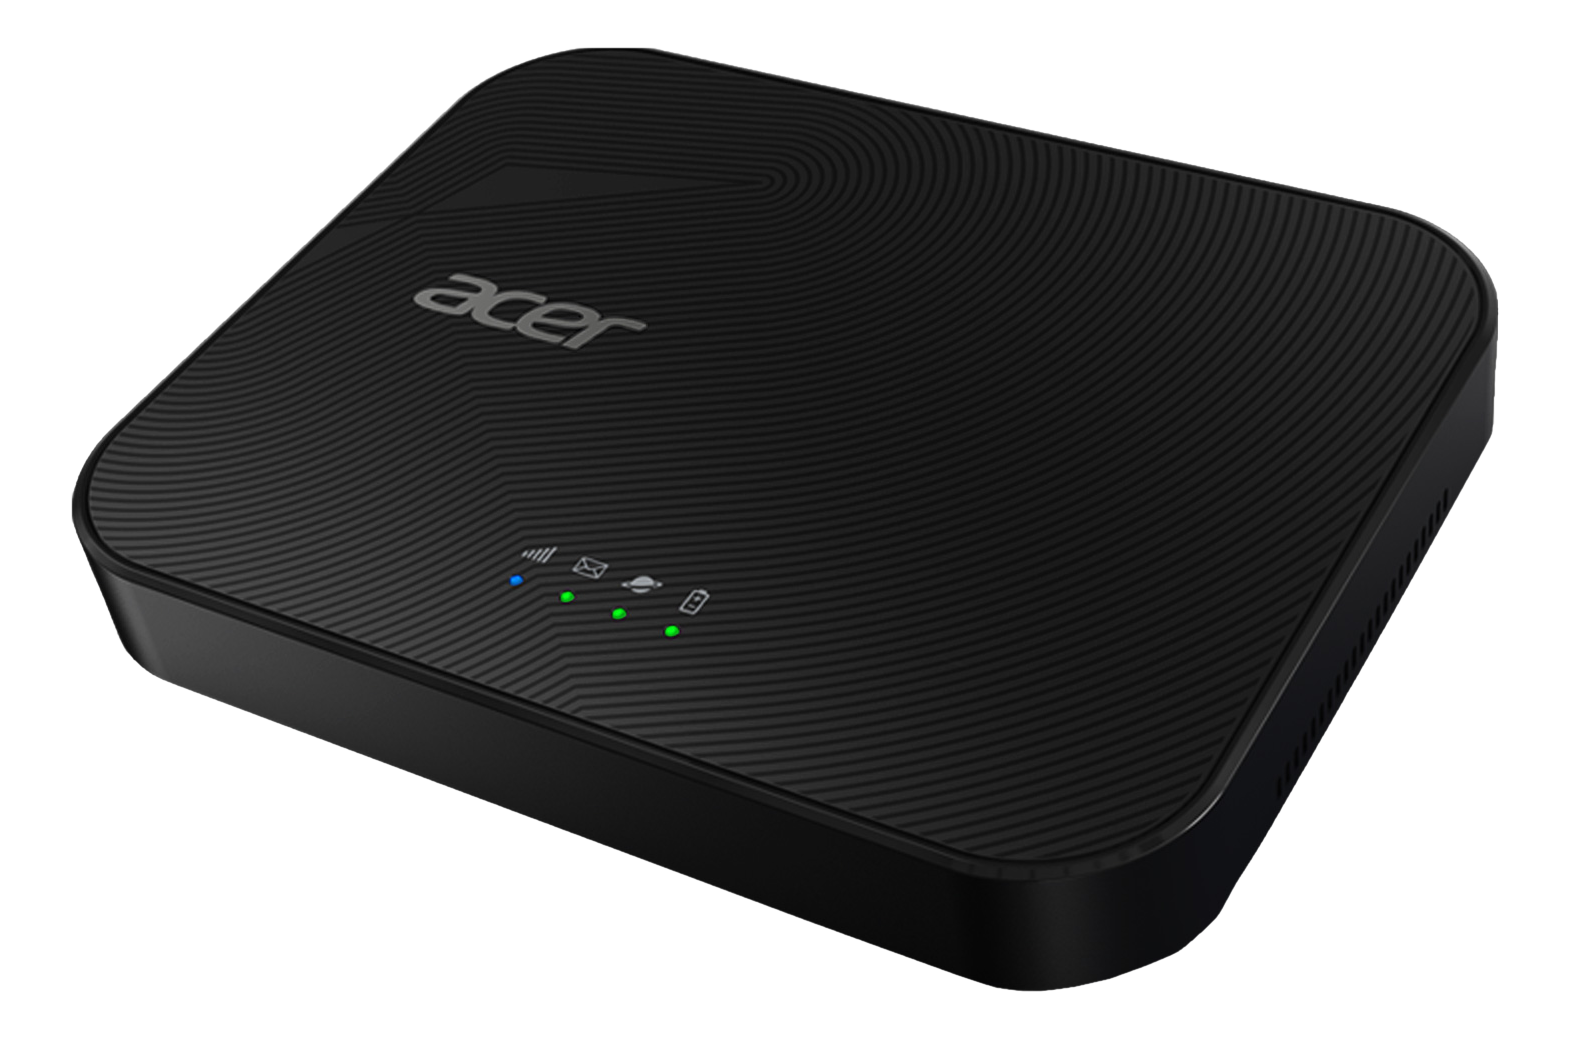 ACER Connect M5 - Mobile WiFi (Schwarz)